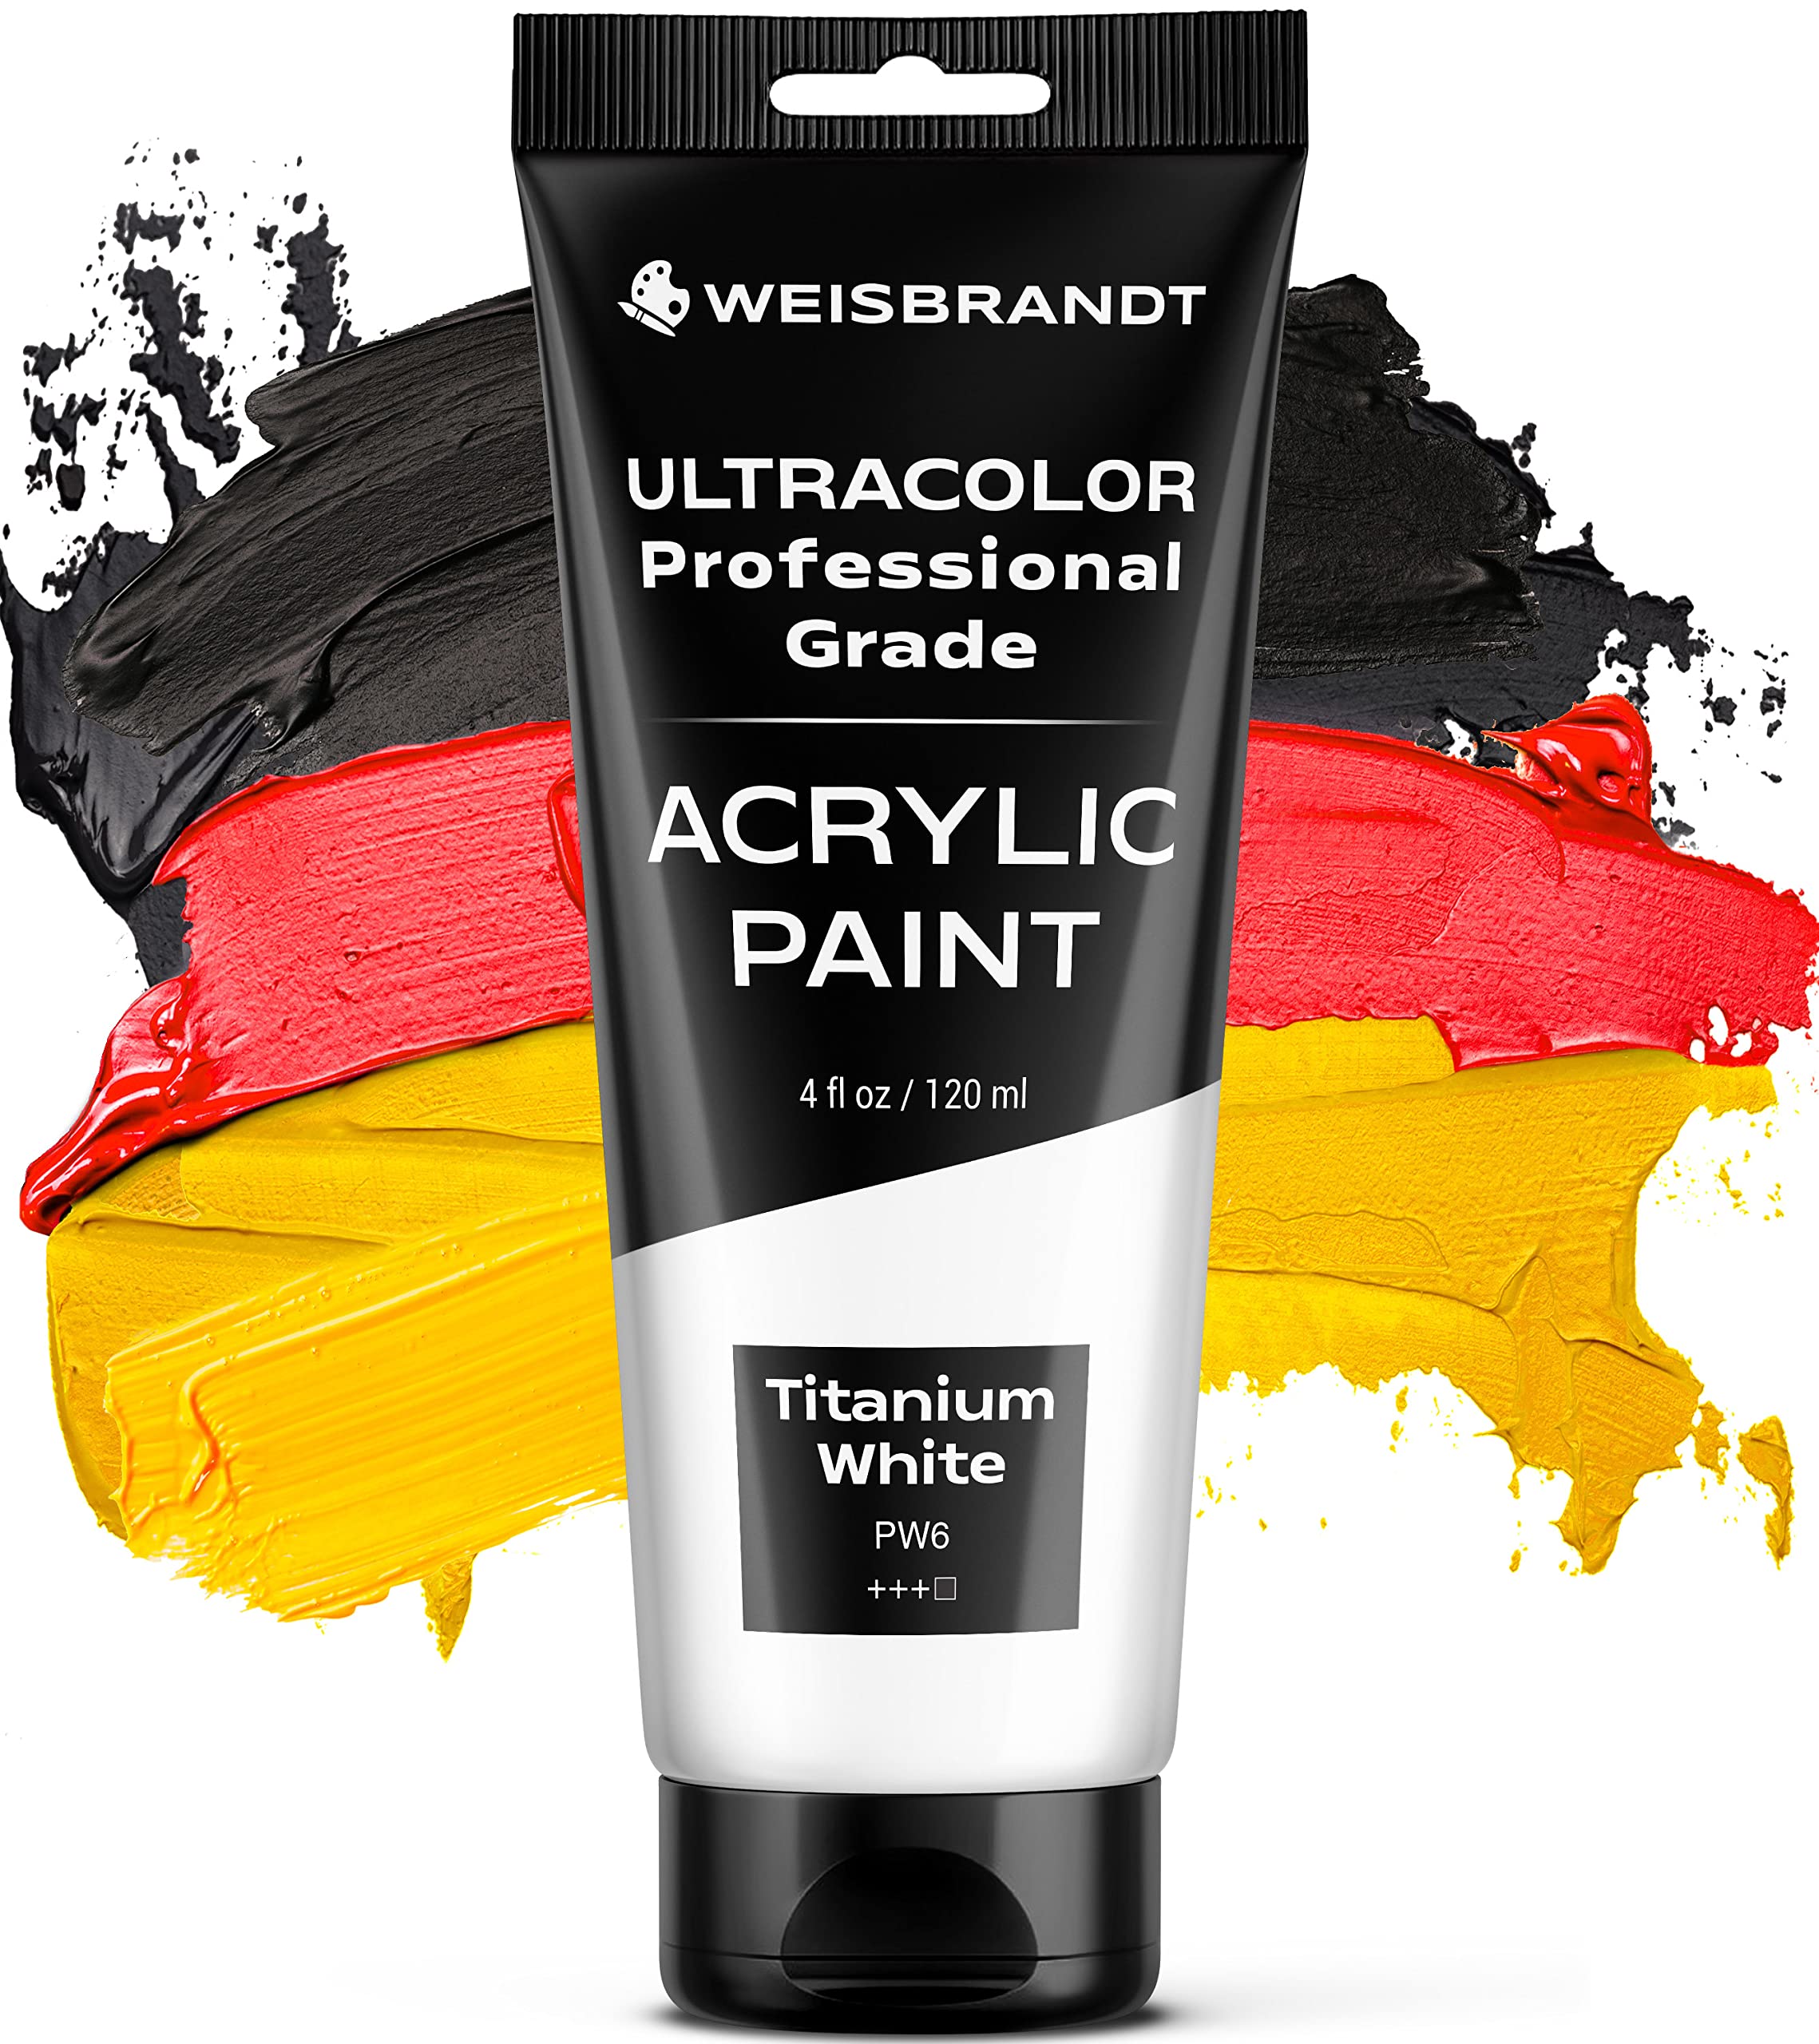 WEISBRANDT Artist Quality Acrylic Paint in Assorted Colors for